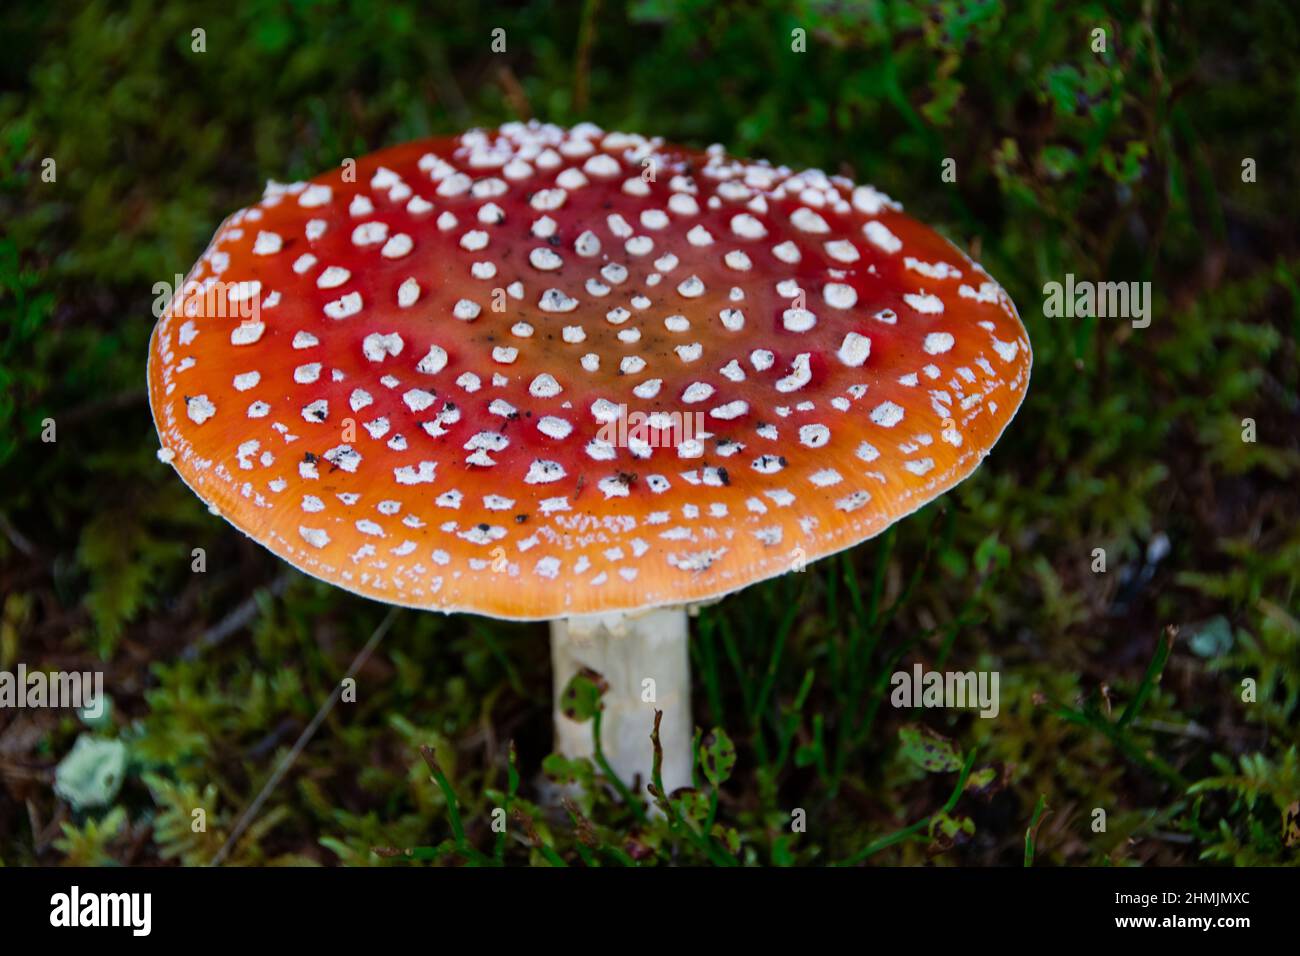 Poisonous red toadstool grows on moist moss soil Stock Photo